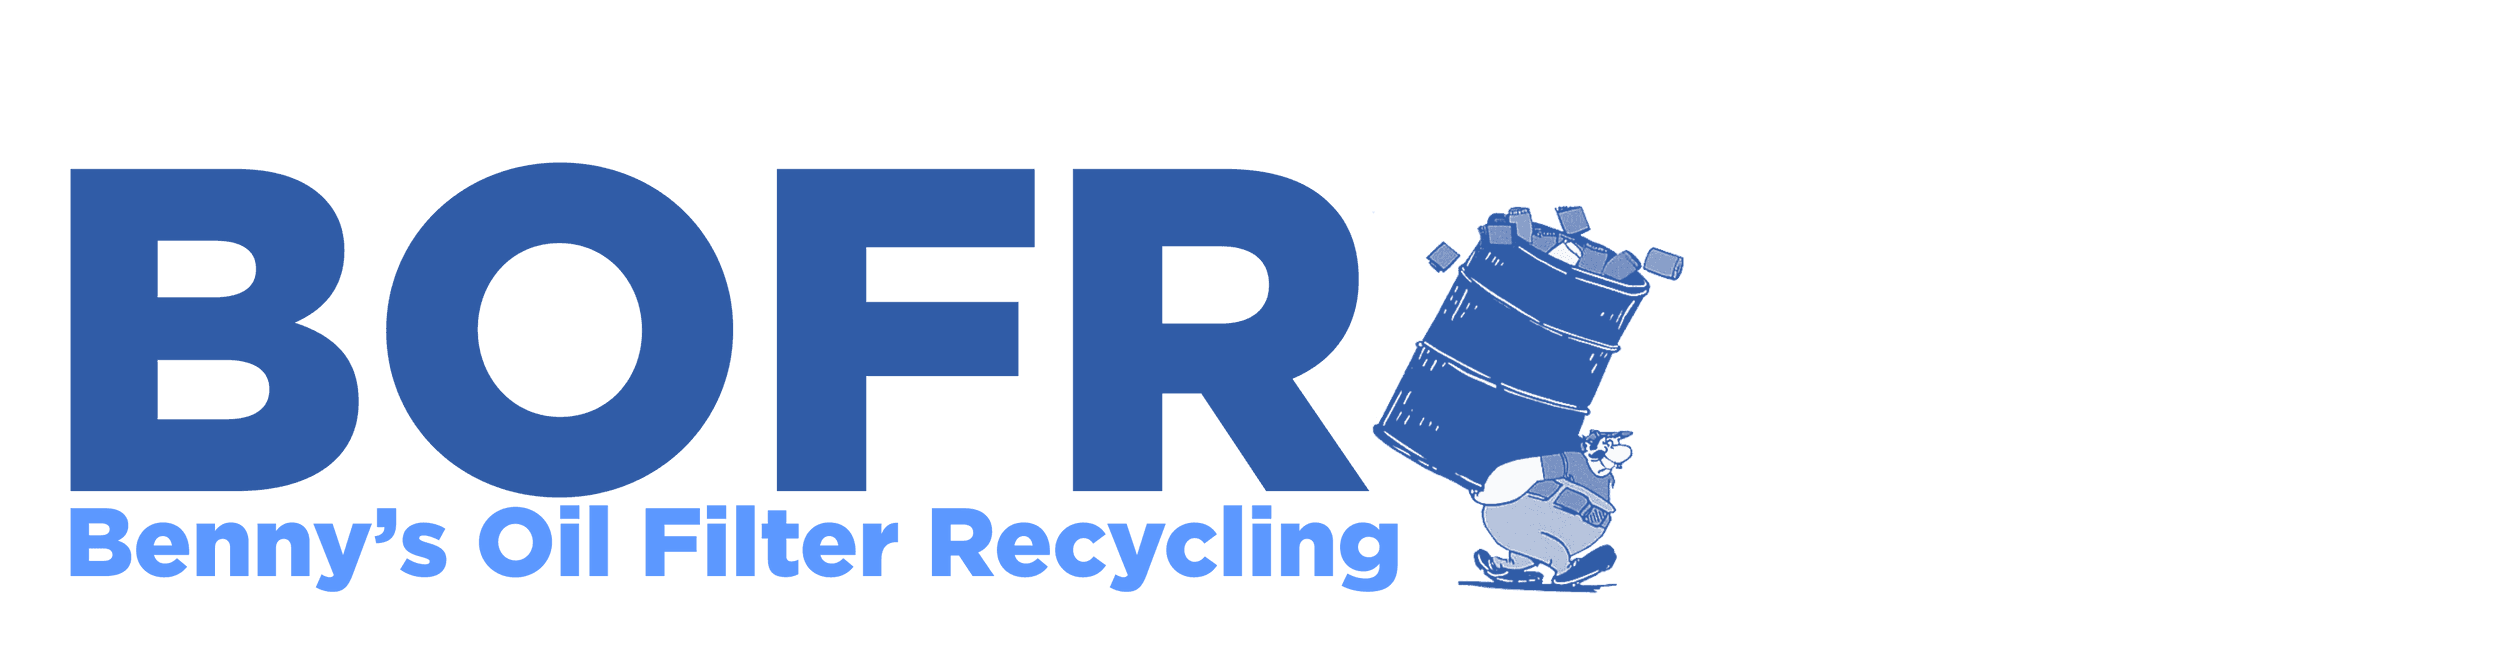 Product RECYCLING | Benny's Maintenance & Oil Filter Recycling image